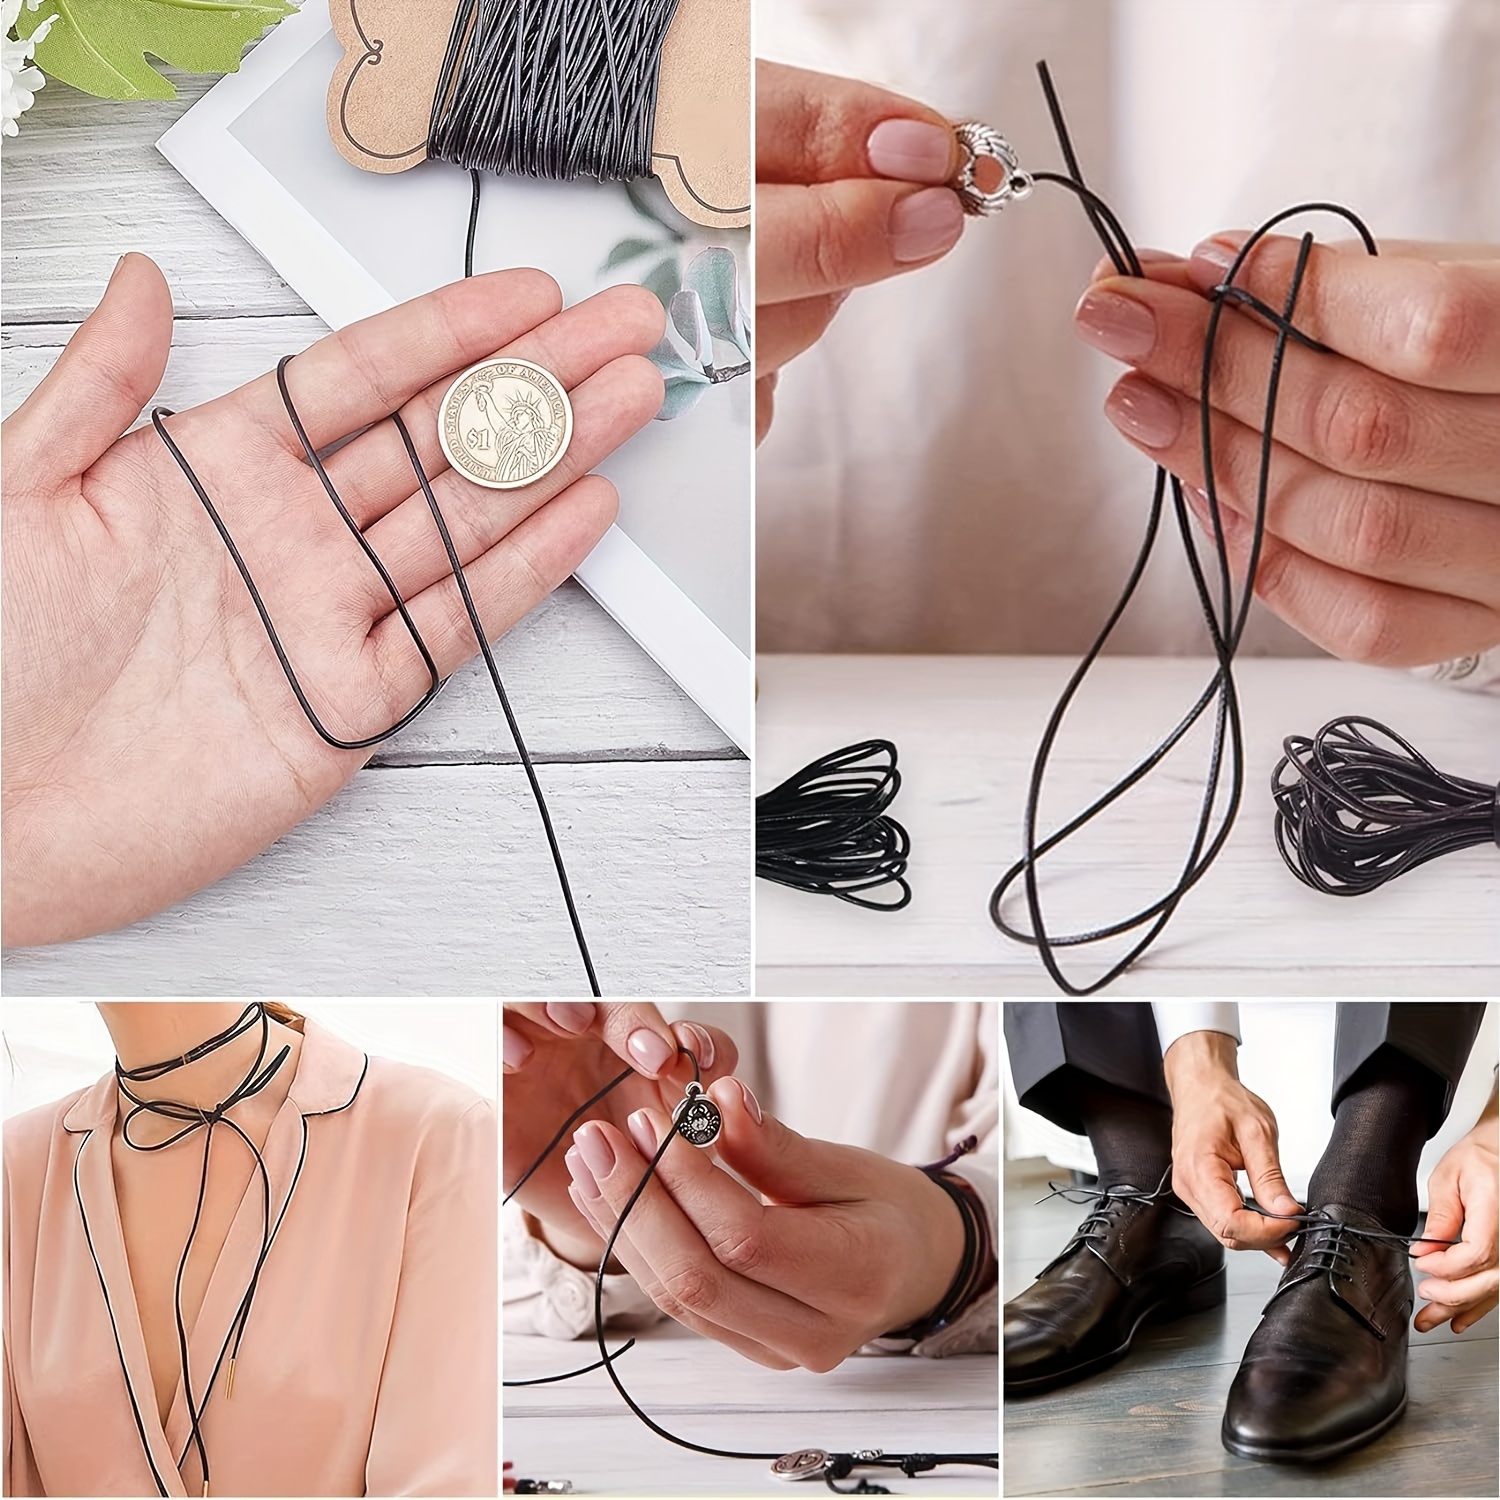 5M Genuine Real Round Leather Cord Rope String for Crafts Necklace